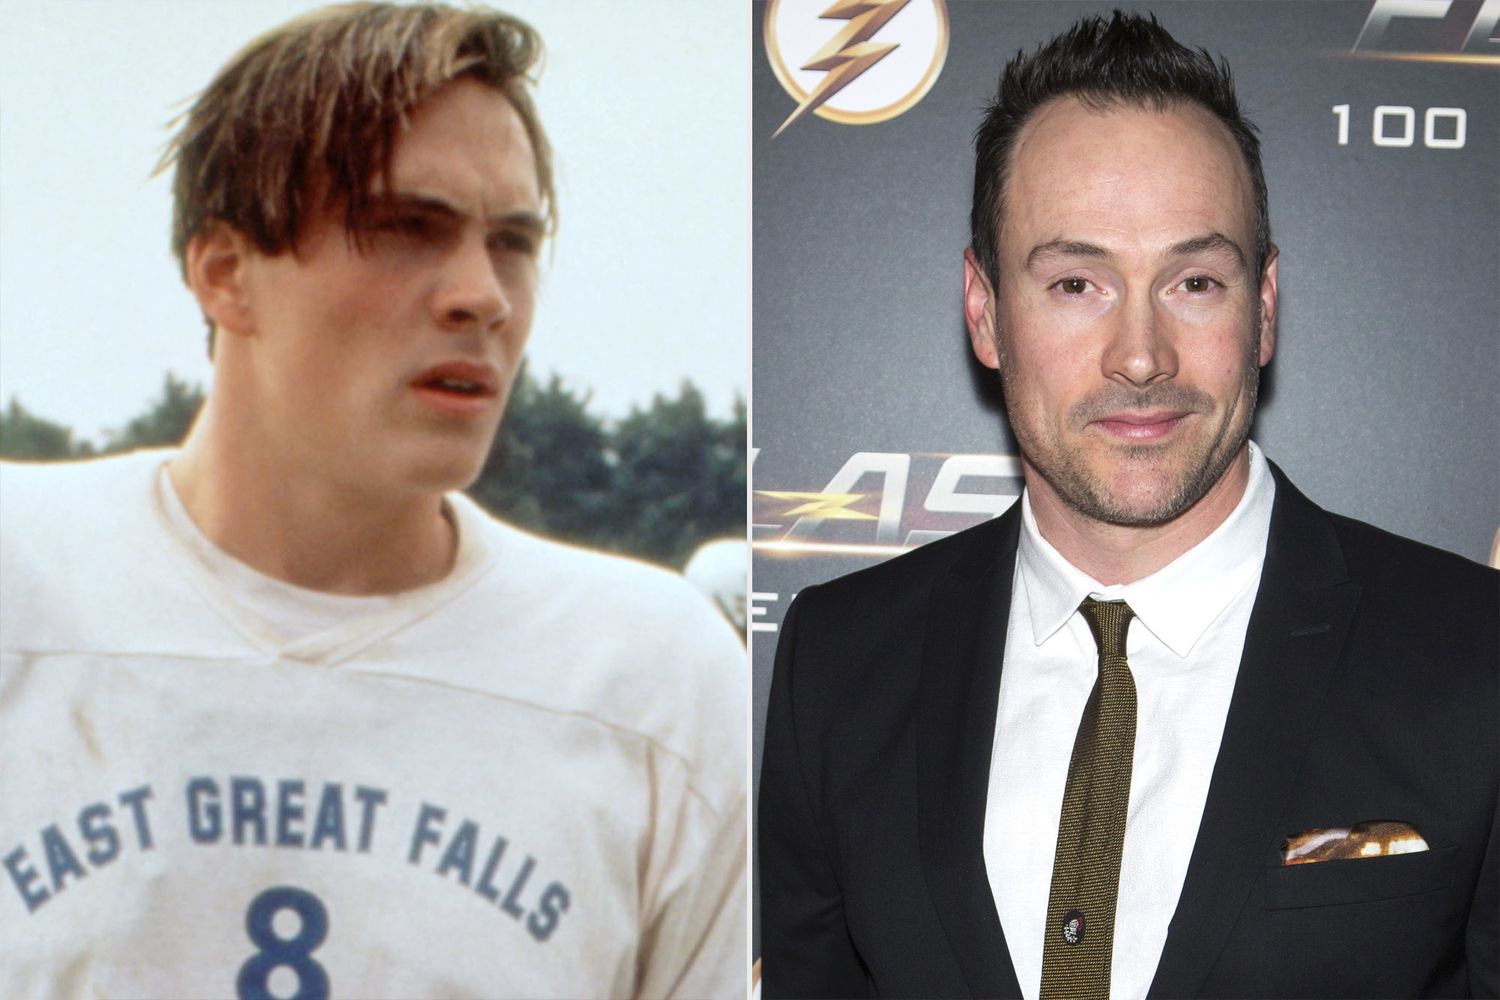 AMERICAN PIE, Chris Klein, Seann William Scott, 1999, (c)Universal/courtesy Everett Collection; VANCOUVER, BC - NOVEMBER 17: "The Flash" actor Chris Klein attends the red carpet at "The Flash" 100TH Episode Celebration at the Commodore Ballroom on November 17, 2018 in Vancouver, Canada. (Photo by Phillip Chin/Getty Images for Warner Bros. Entertainment Inc.)